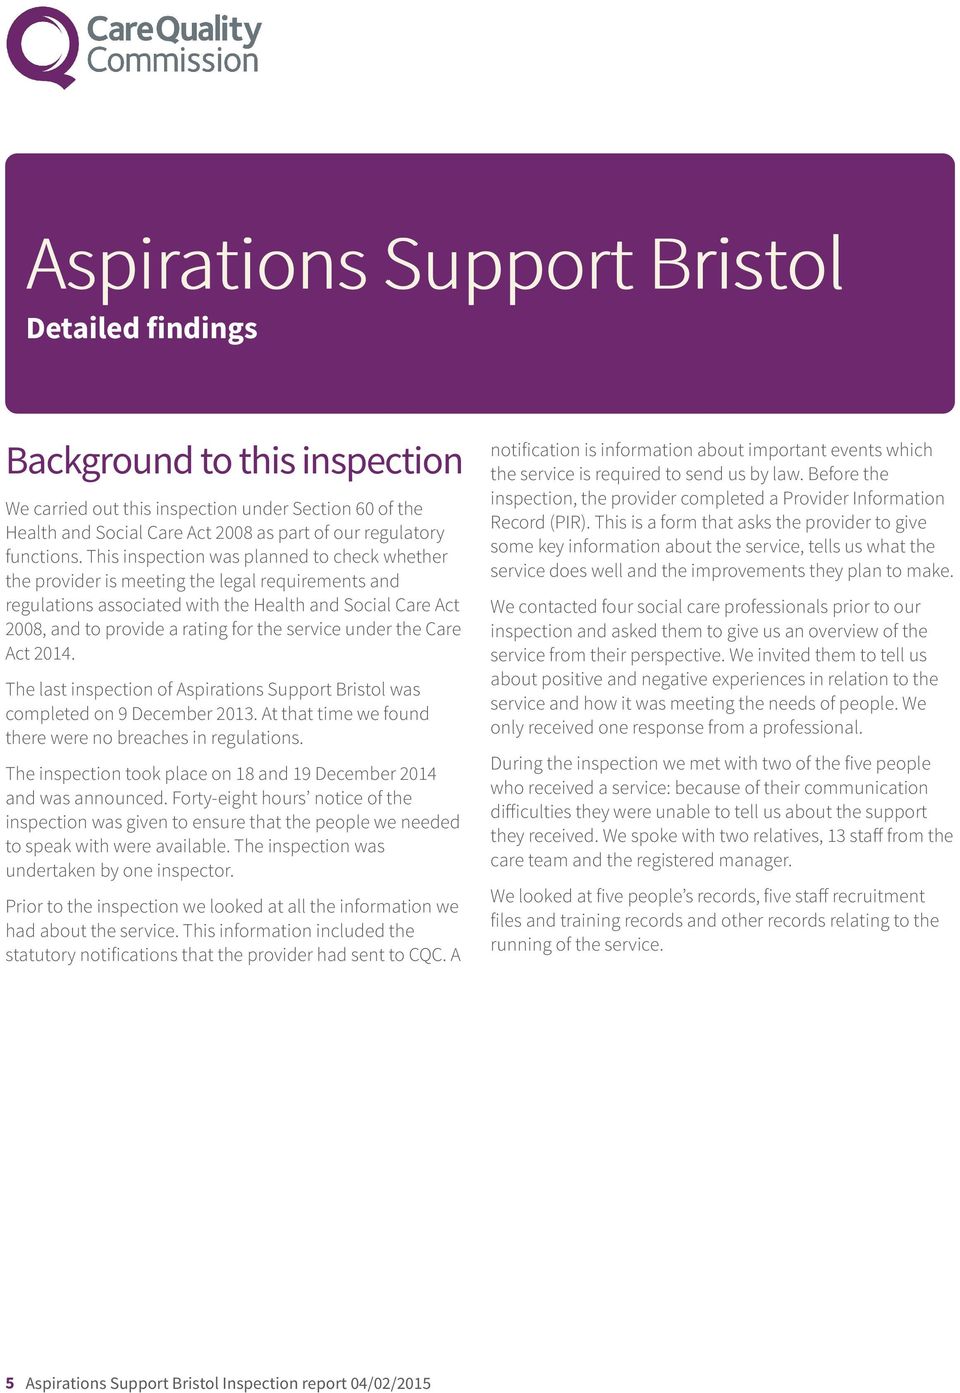 service under the Care Act 2014. The last inspection of Aspirations Support Bristol was completed on 9 December 2013. At that time we found there were no breaches in regulations.